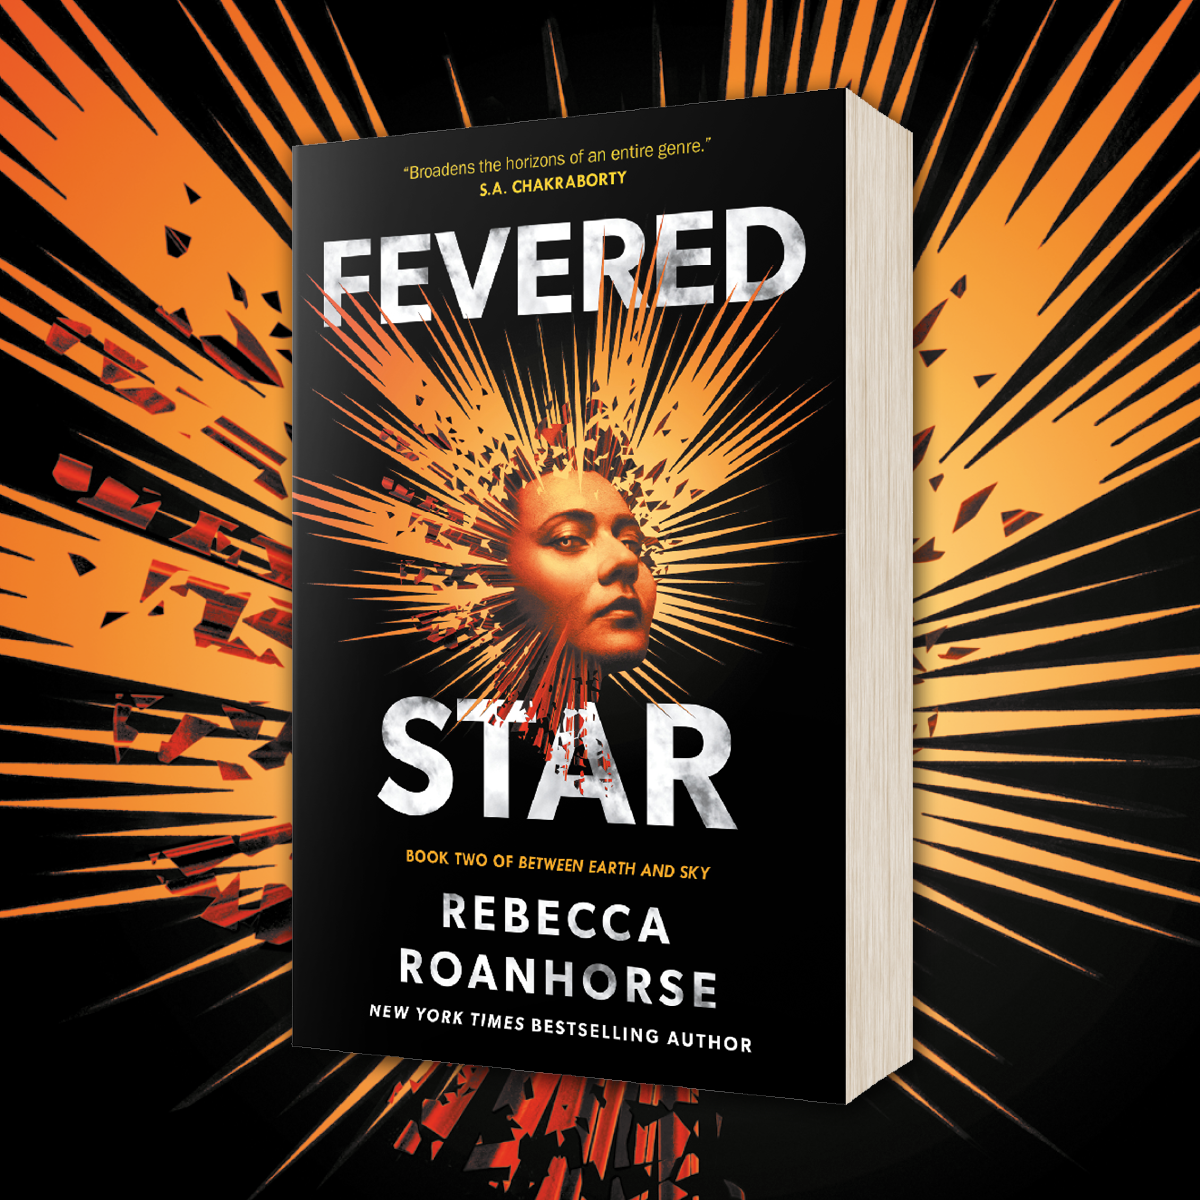 OUT NOW: Fevered Star by Rebecca Roanhorse (UK)!